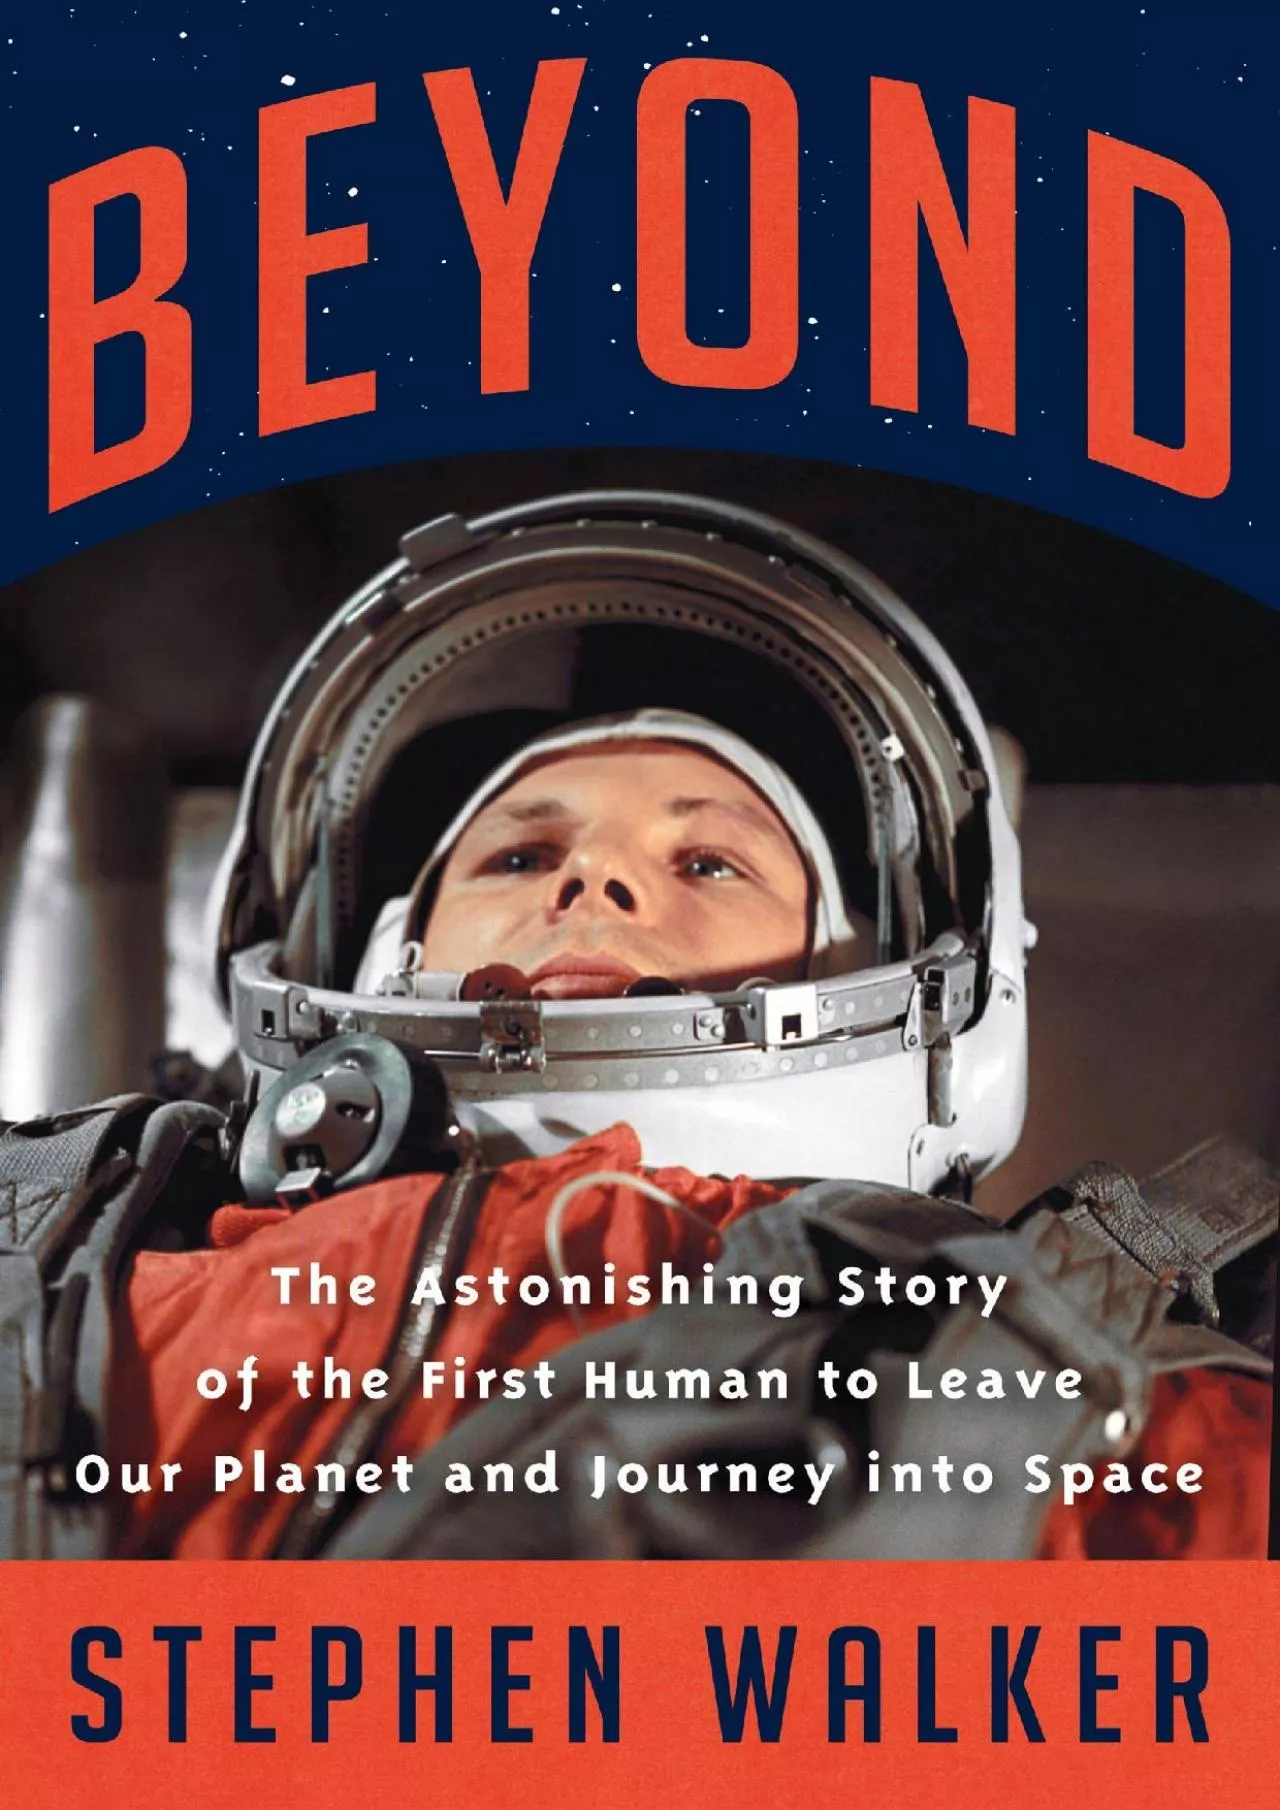 (BOOS)-Beyond: The Astonishing Story of the First Human to Leave Our Planet and Journey